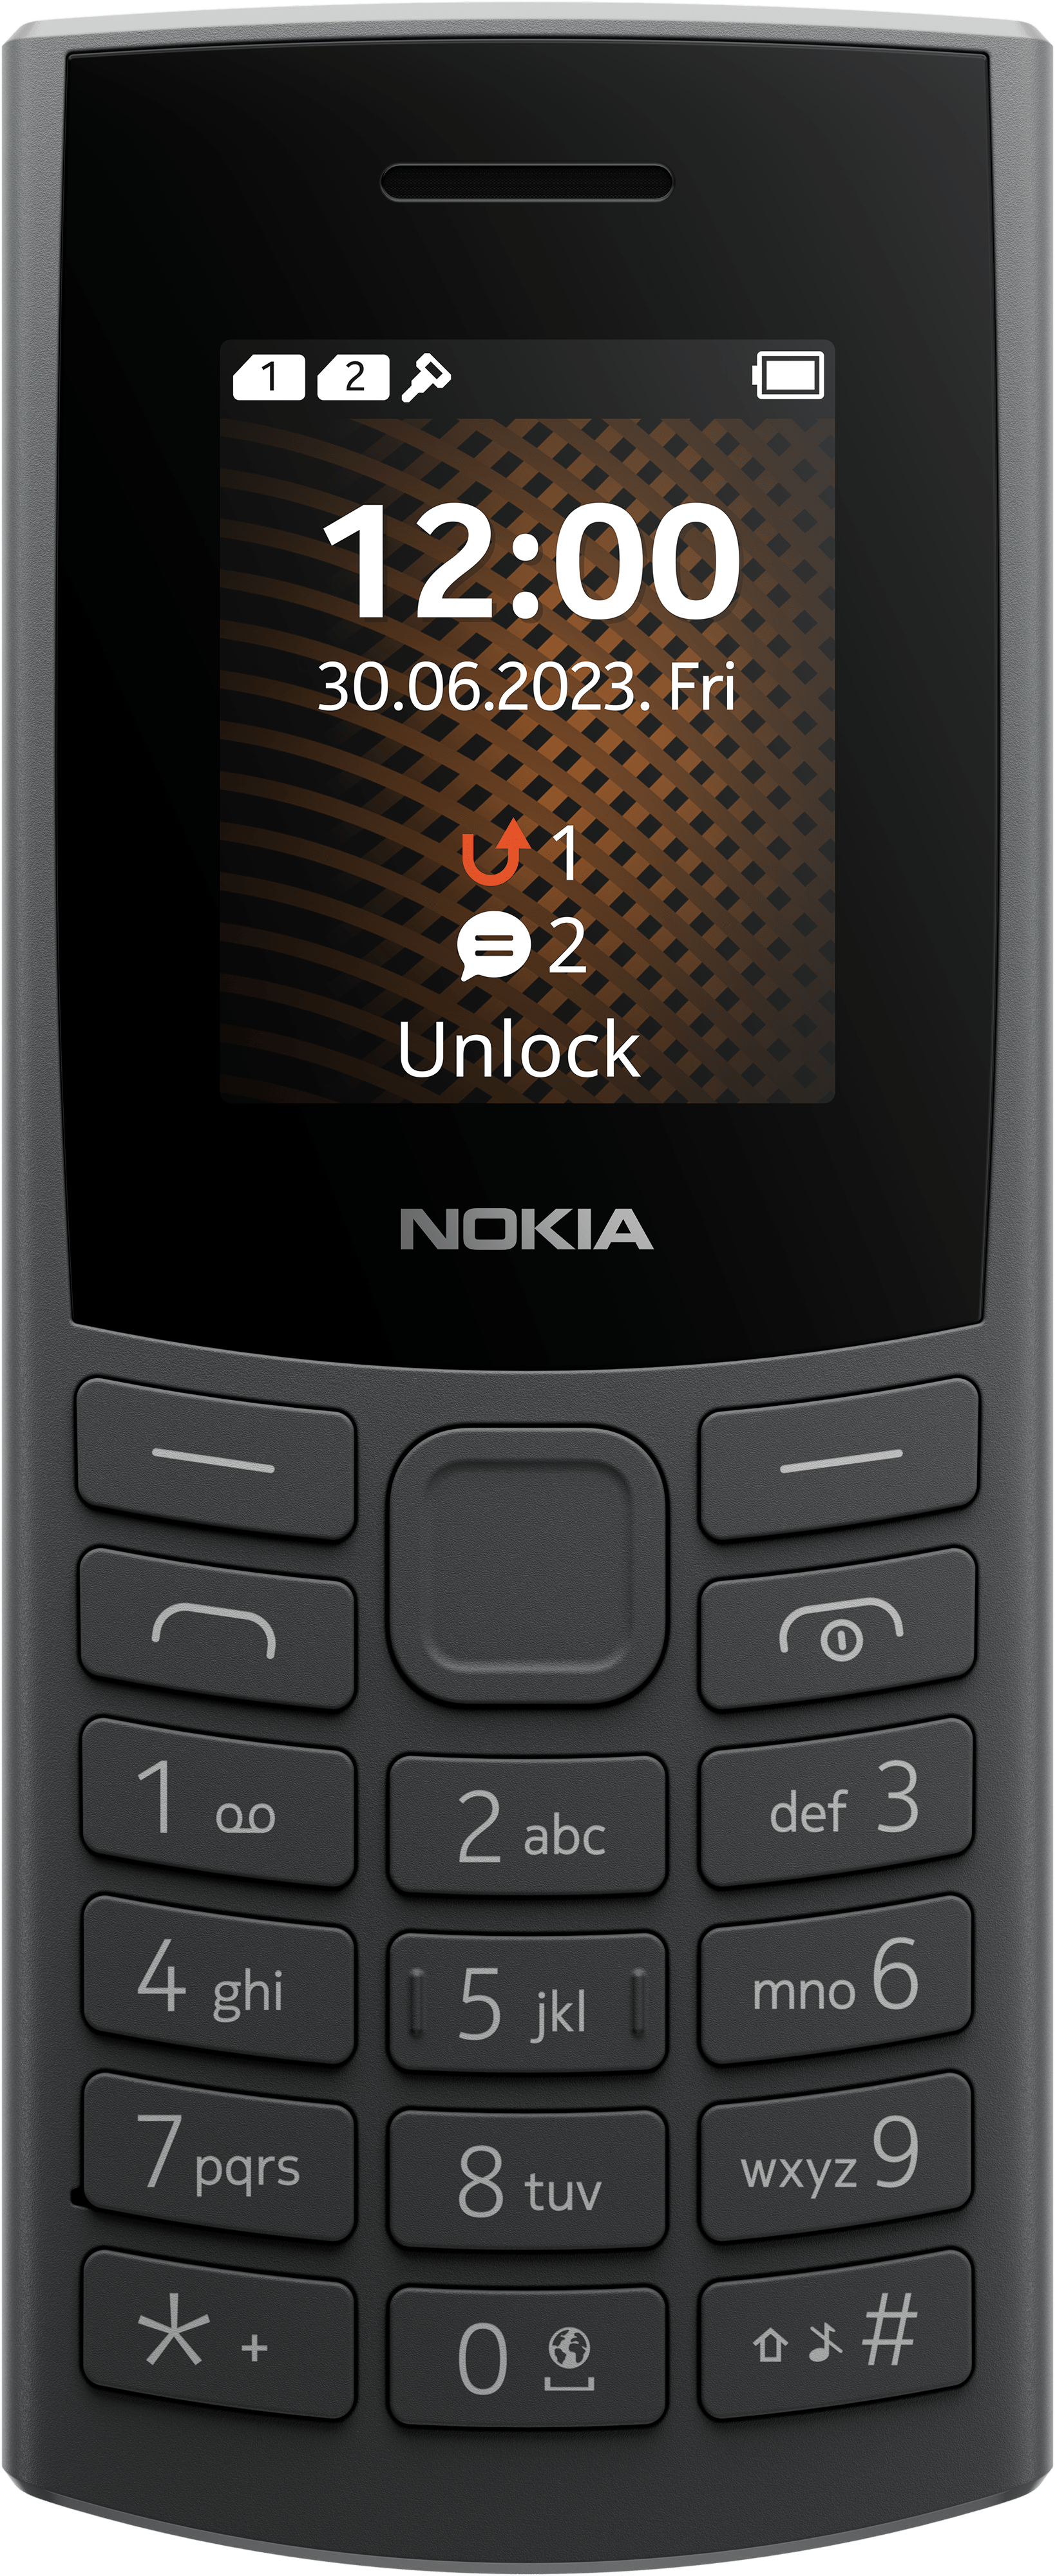 Nokia Mobile Phones: Buy Online at Best Prices and Offers in India